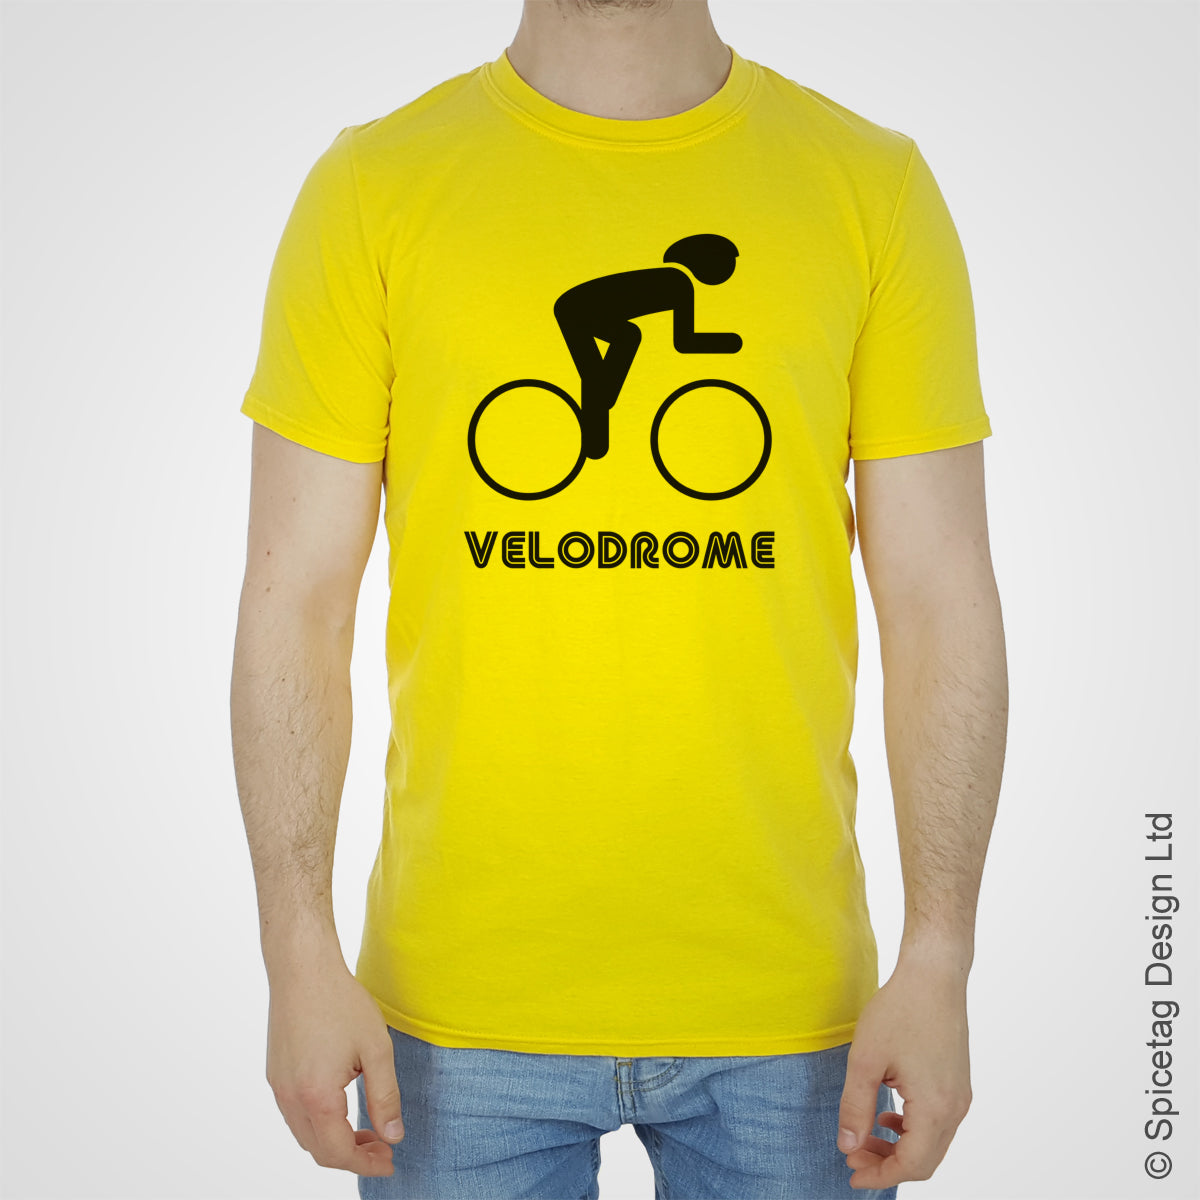 Velodrome cycling bike ride T-shirt Tshirt T shirt Tee clothing clothes fashion style sport sports fan olympics athletics track field health fitness world competition champion